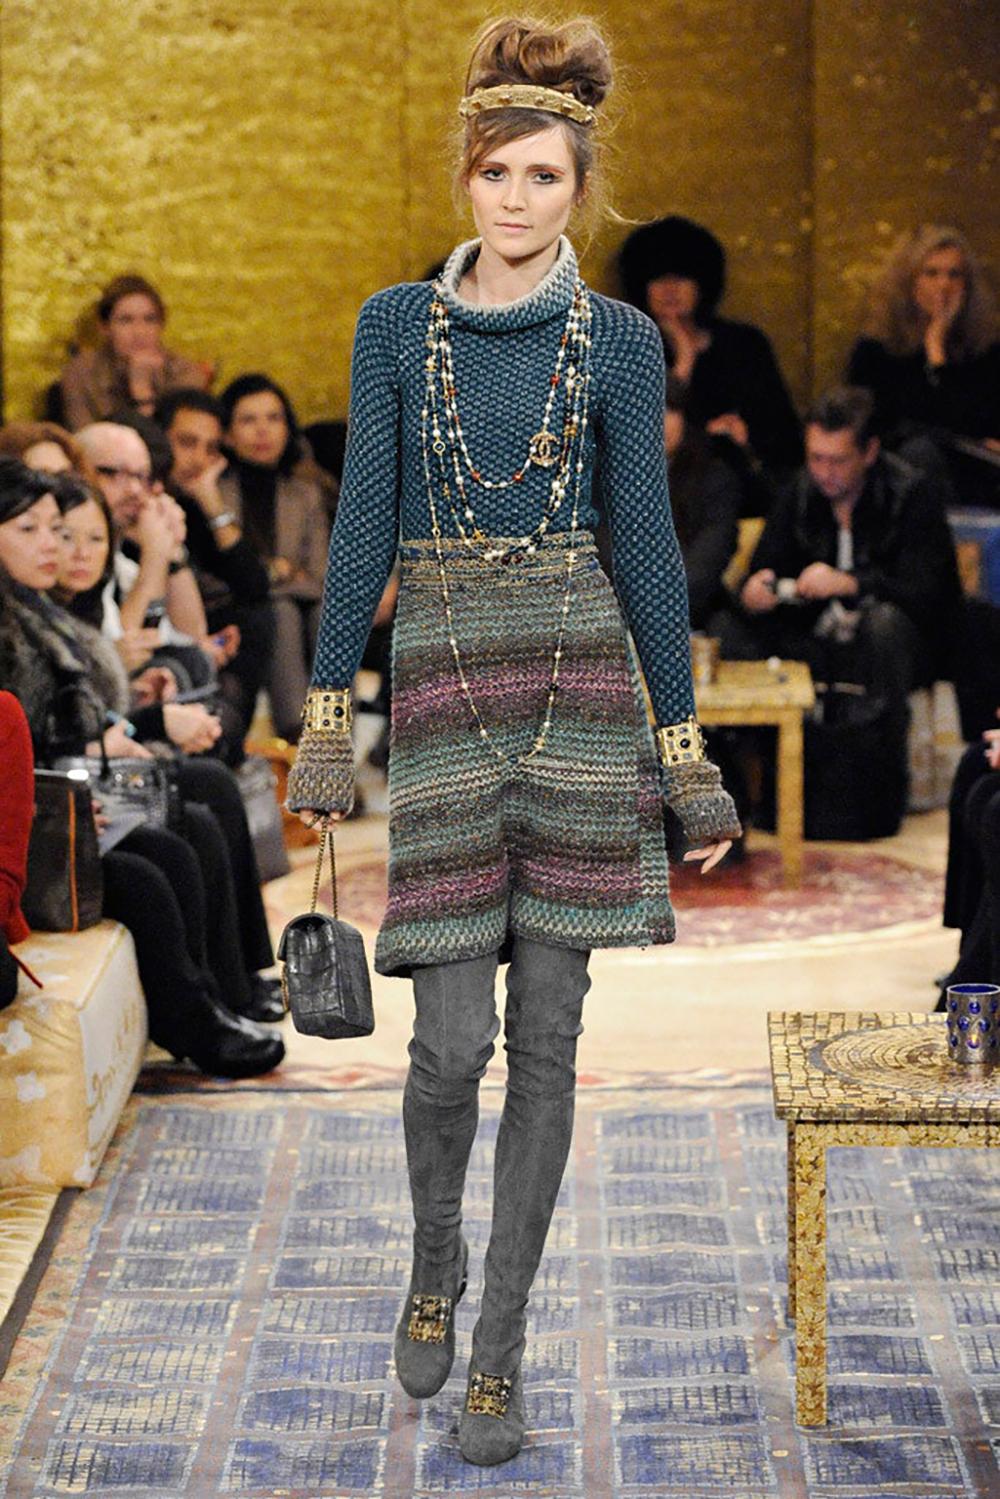 Fabulous Chanel knit from from Runway of Paris / BYZANCE Metiers d’Art Collection by Mr Karl Lagerfeld. Inspirated by the lost culture of Byzantine Empire.
Noble sublime colors with a spin of iridiscent lurex threads. Detail of knit like a